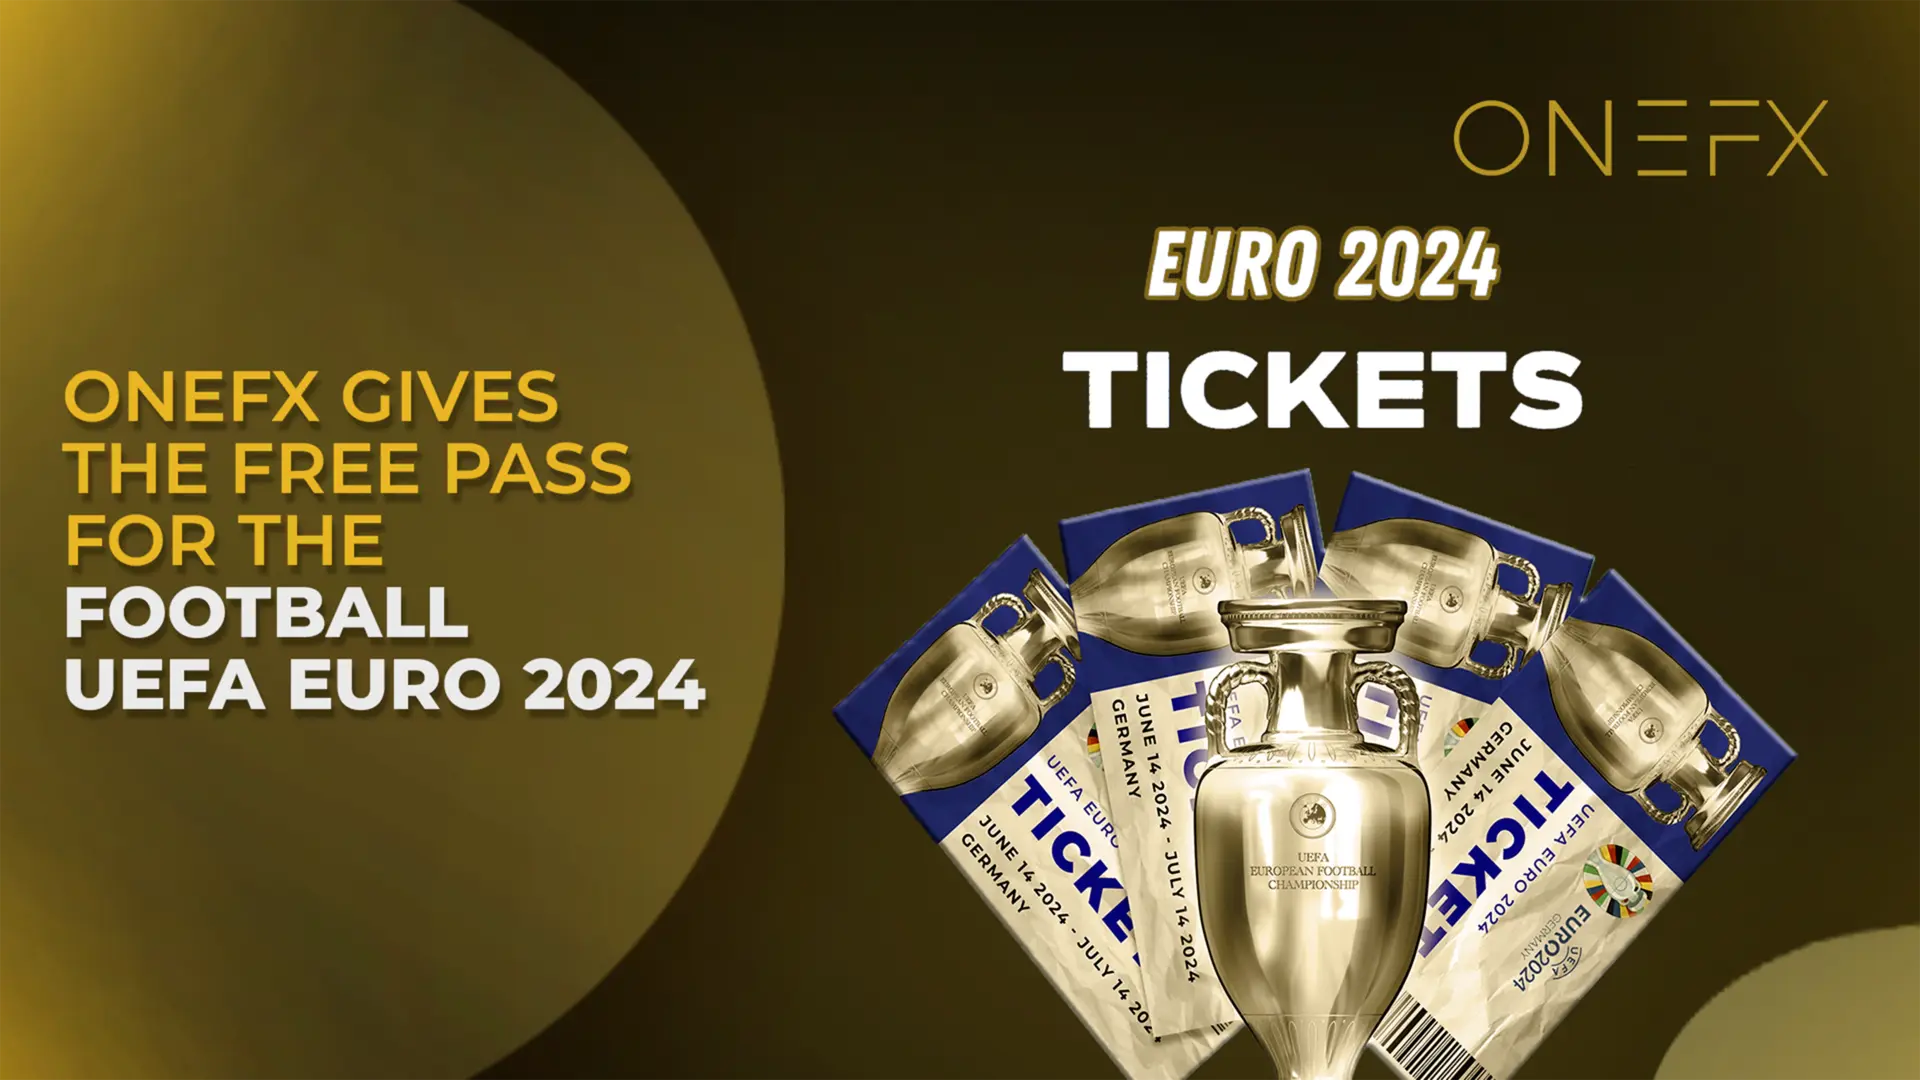 ONEFX Gives The Free Pass For the Football UEFA EURO 2024